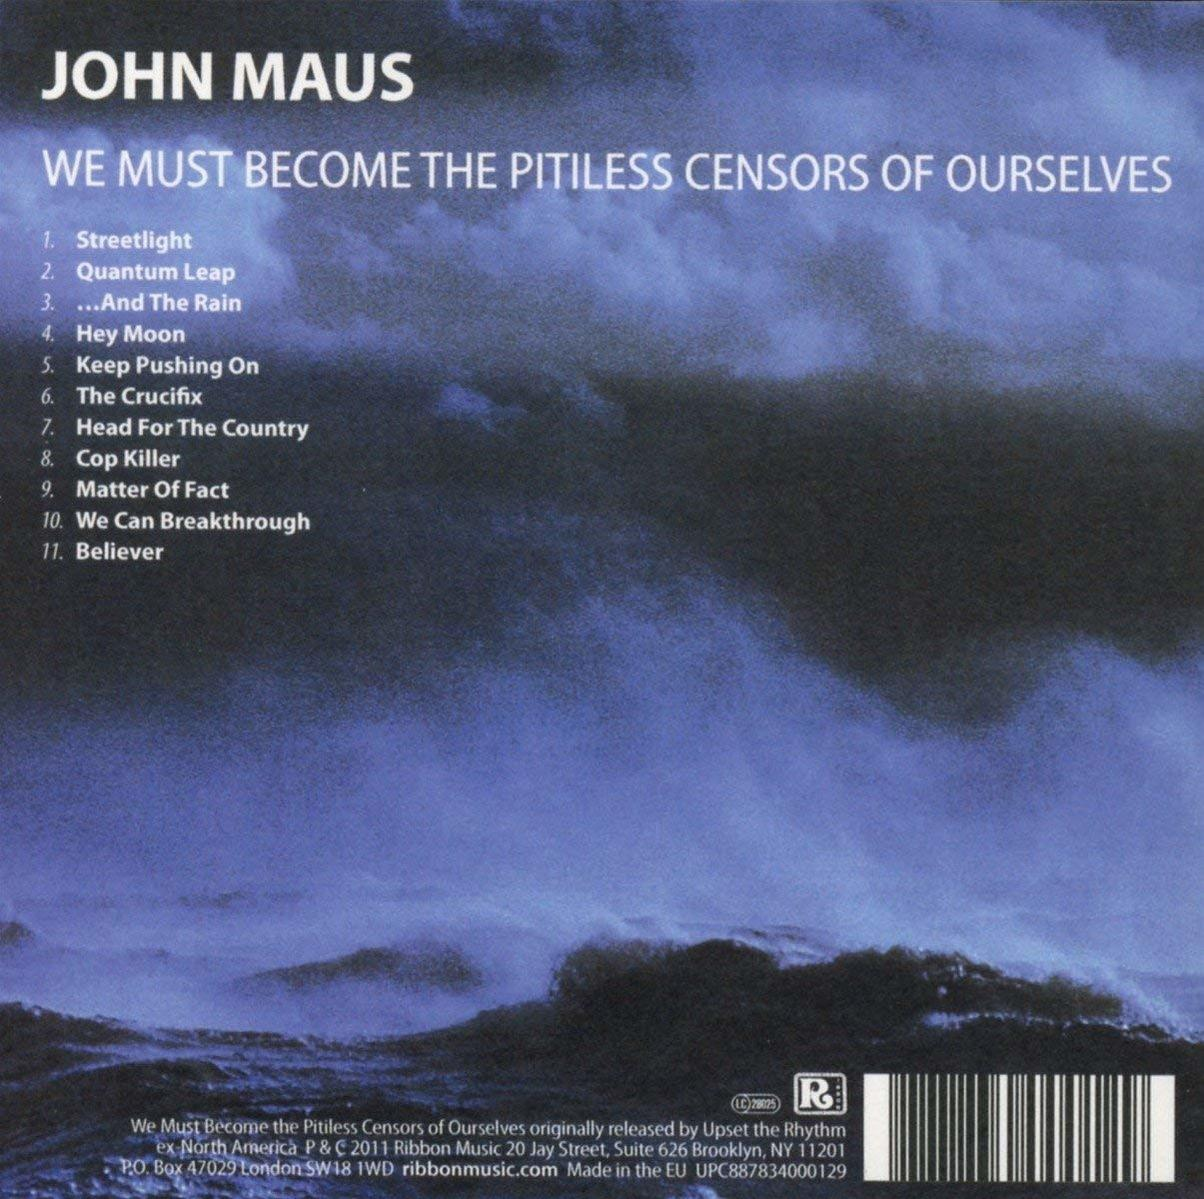 Ourselves Censors John - We Become Of Must Maus (CD) Pitiless - The